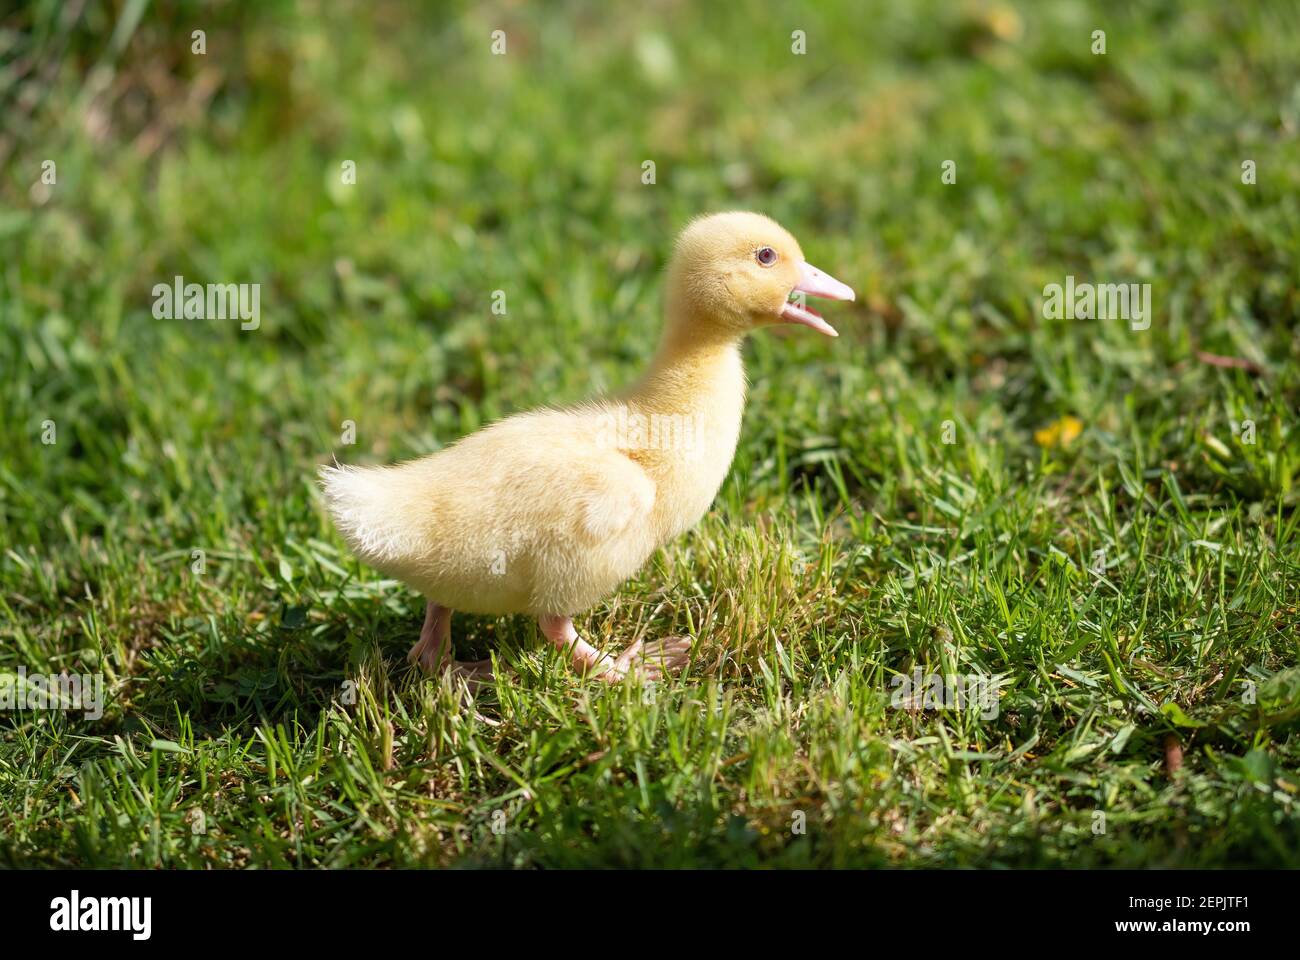 Cute small fluffy duckling outdoor. Yellow baby duck bird on spring green grass discovers life. Organic farming, animal rights, back to nature concept Stock Photo